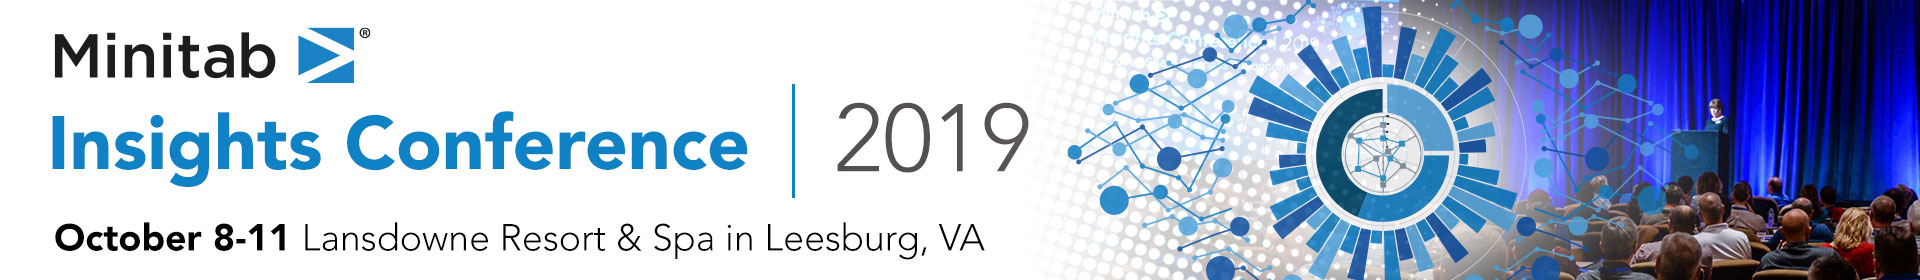 Minitab Insights Conference 2019 Event Banner